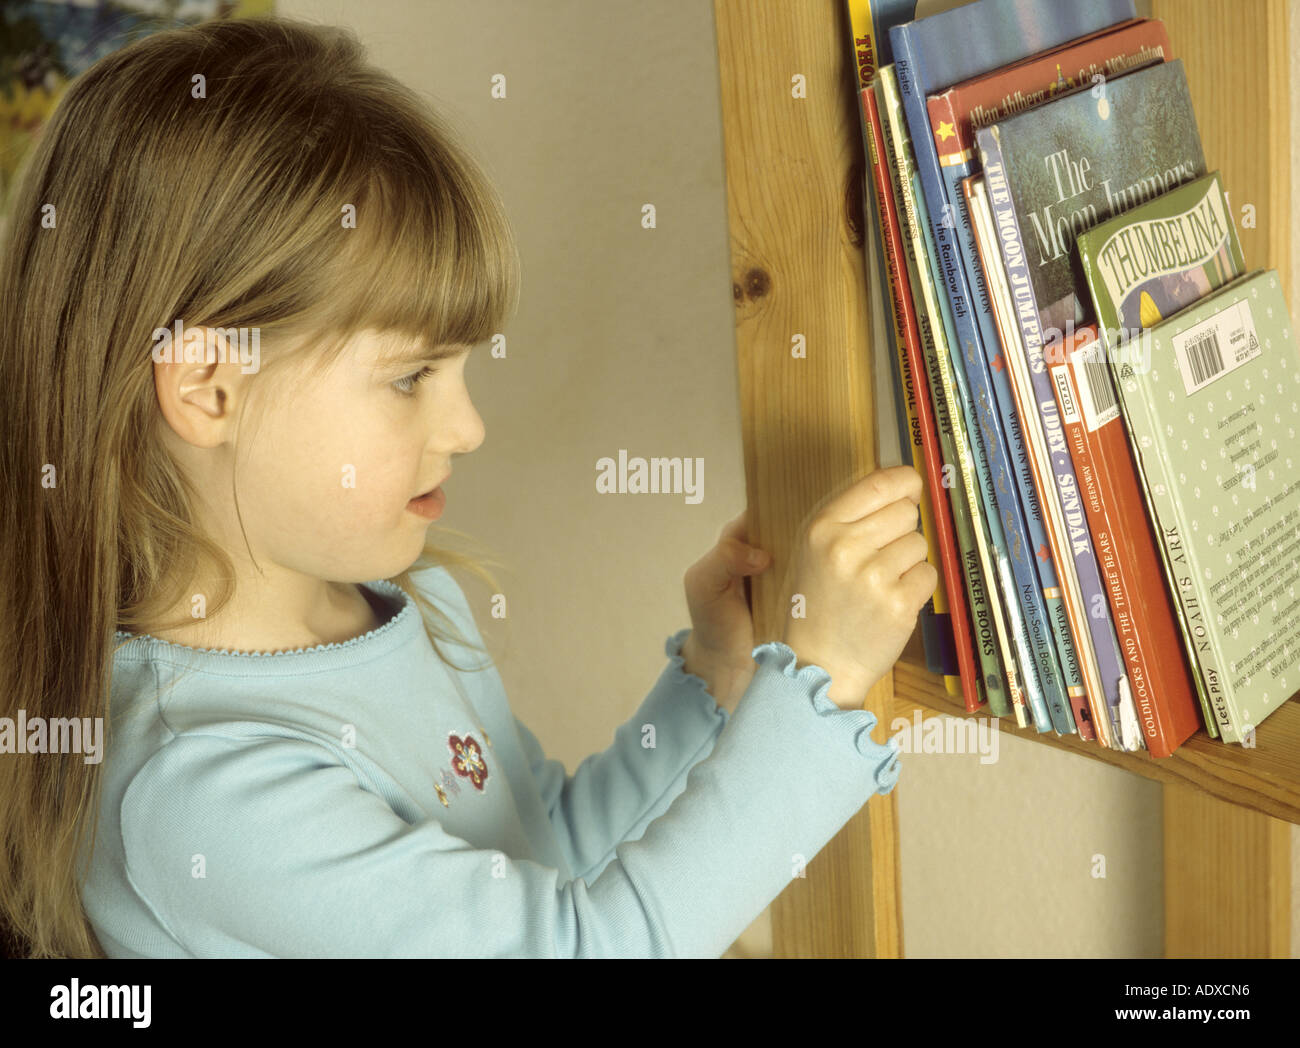 Young Girl Choosing A Book From A Bookshelf Stock Photo 7718741